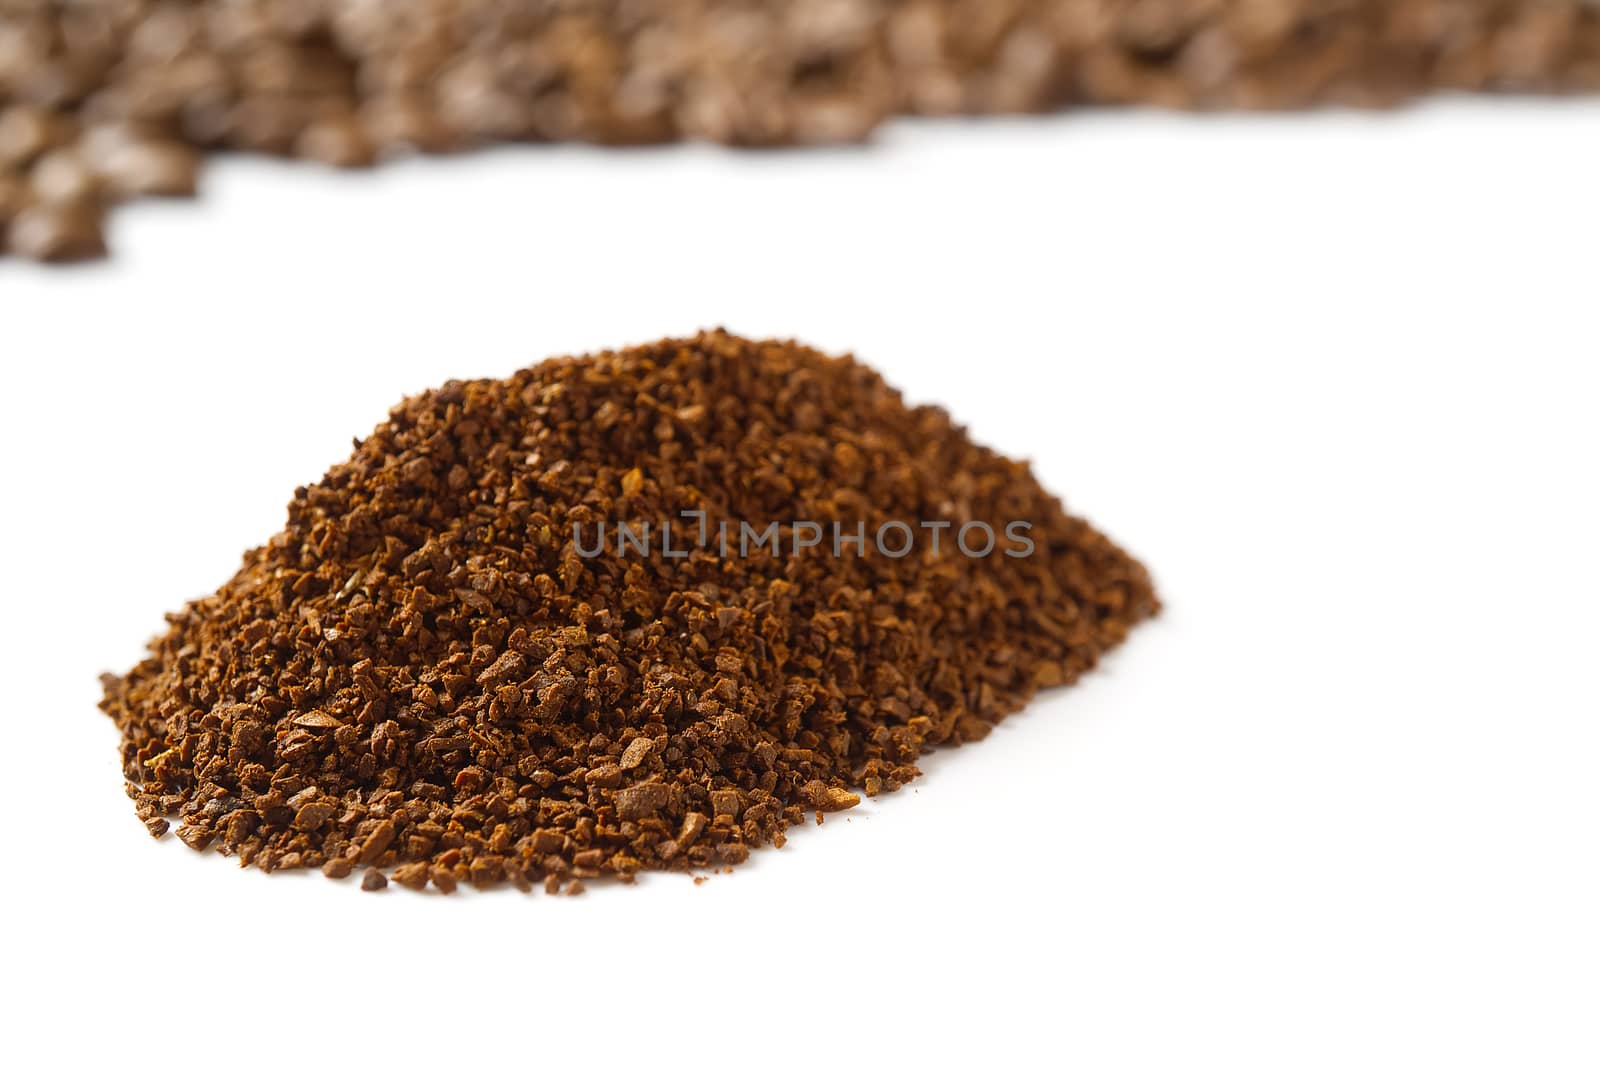 Pile of the ground coffee flakes isolated over the white background. pile of melted coffee by PhotoTime